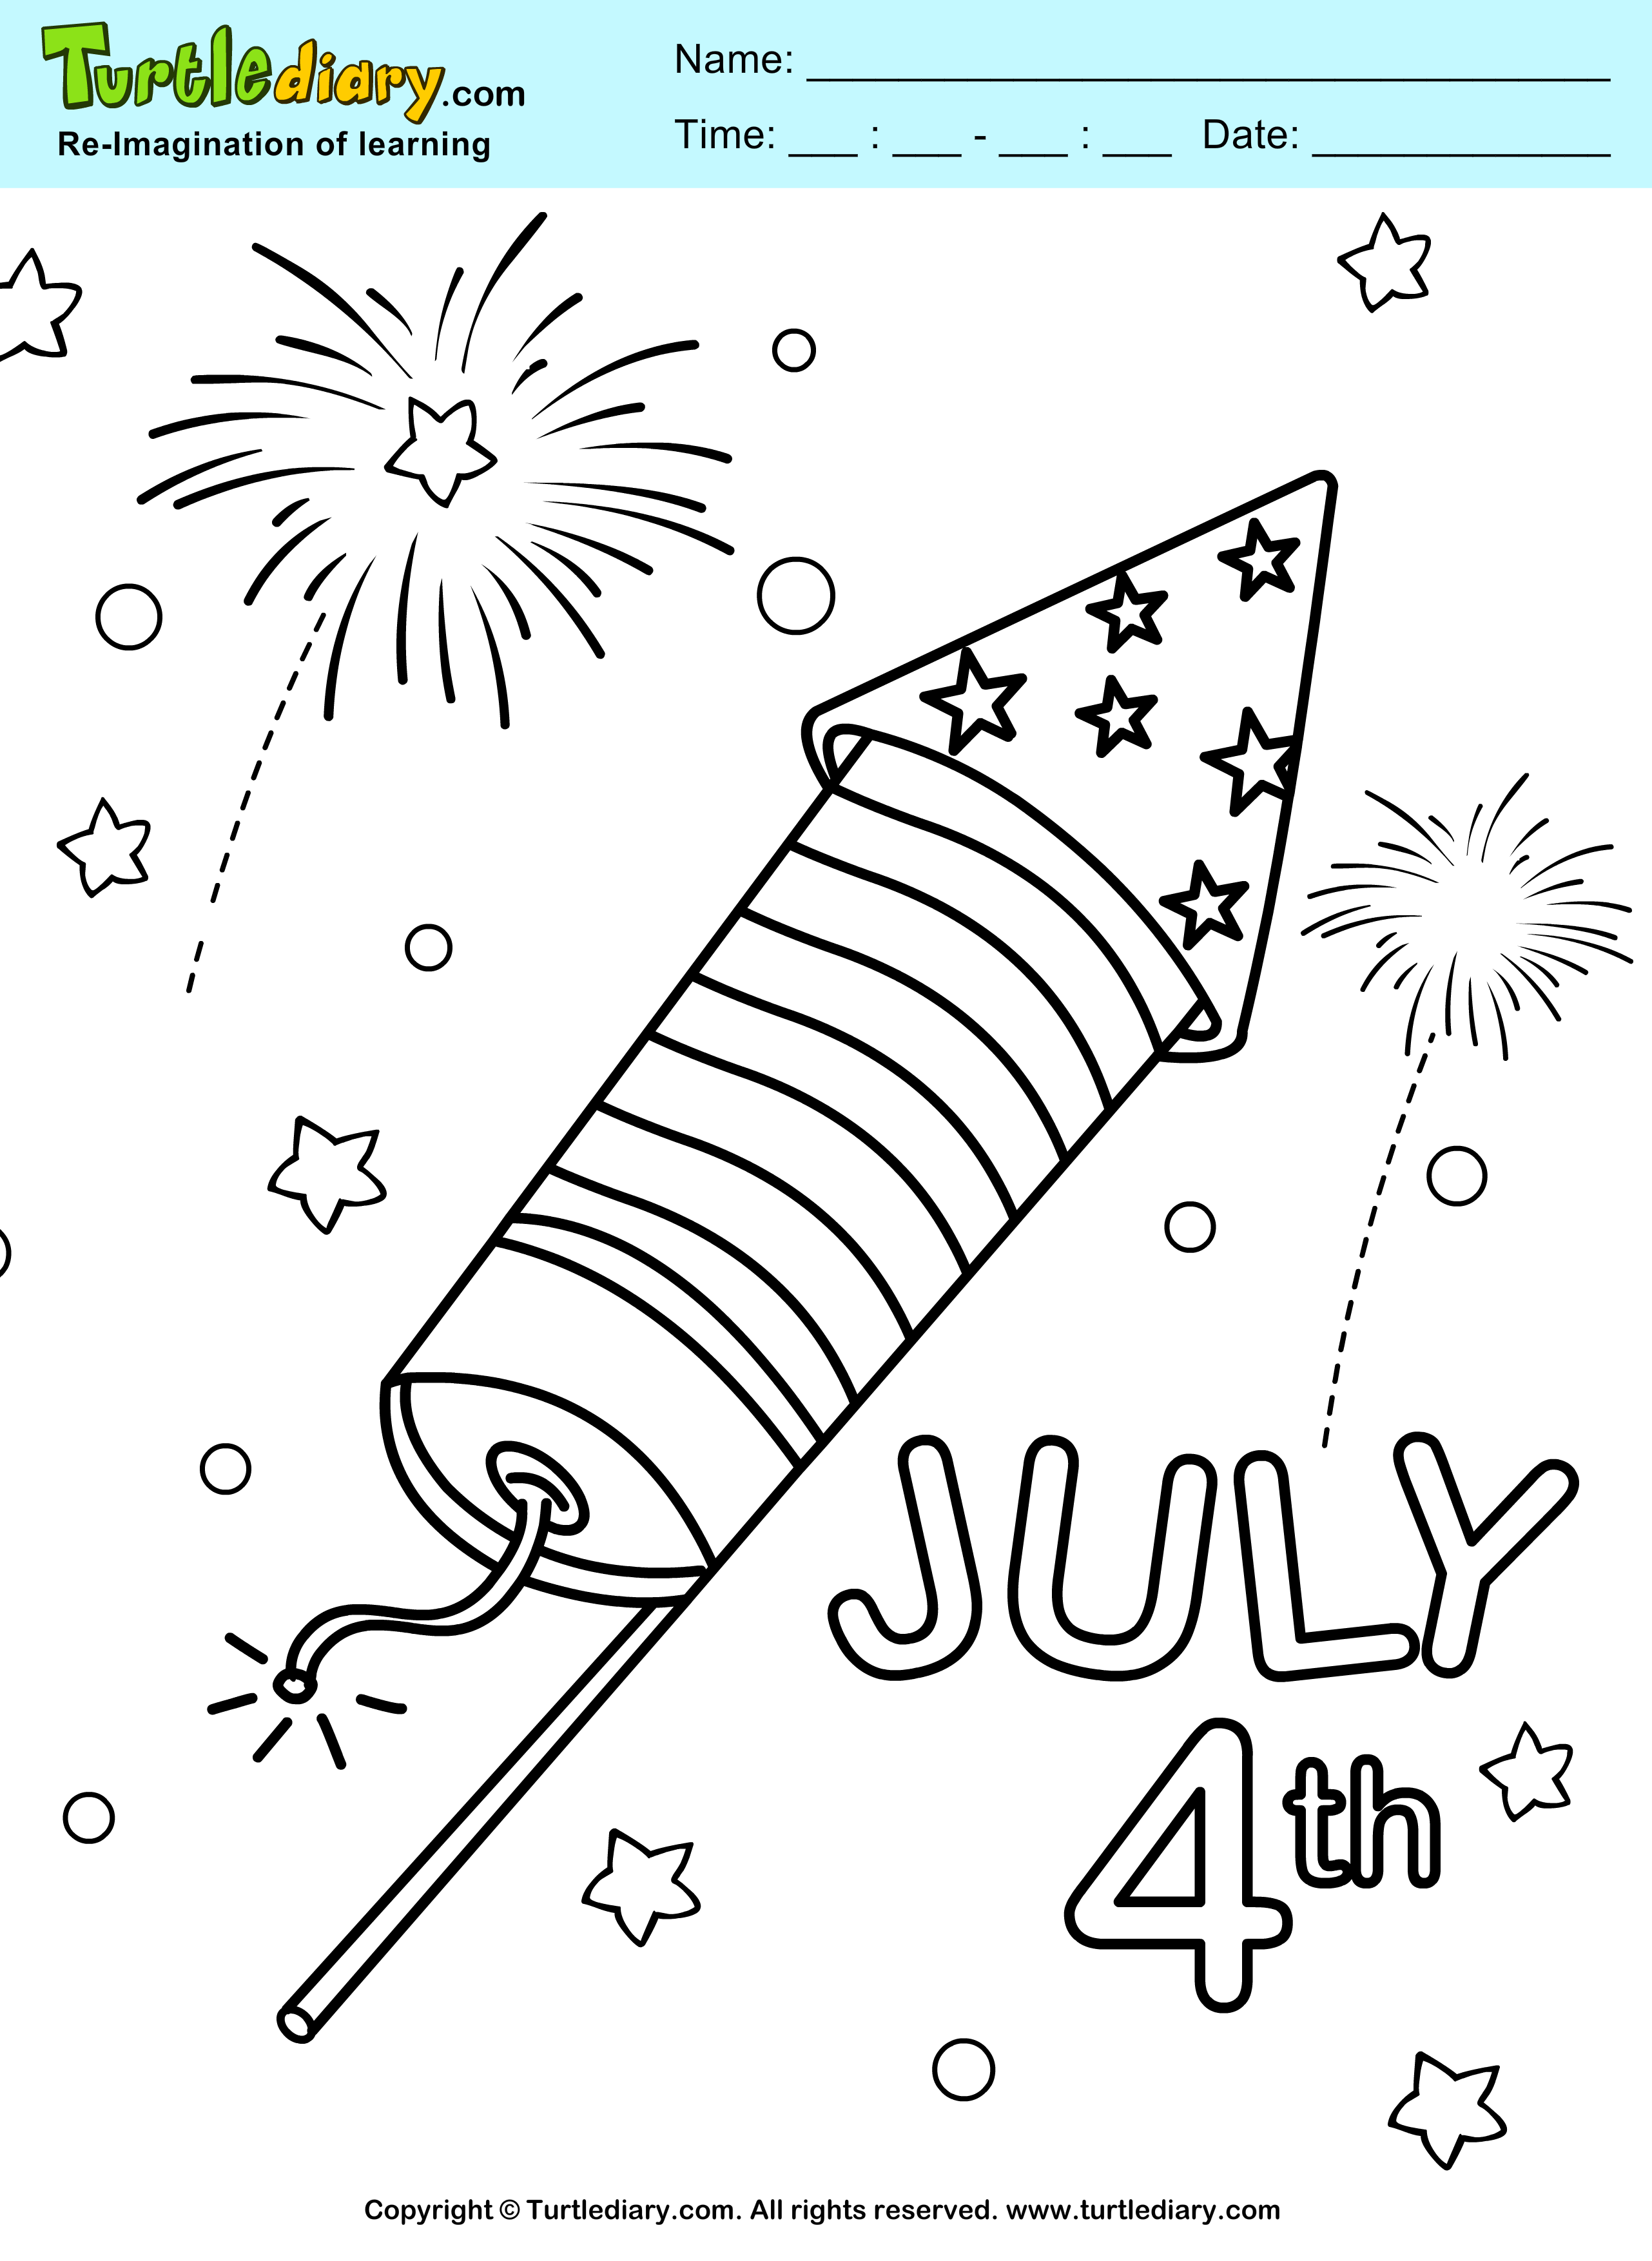 4th of July Fireworks Coloring Page